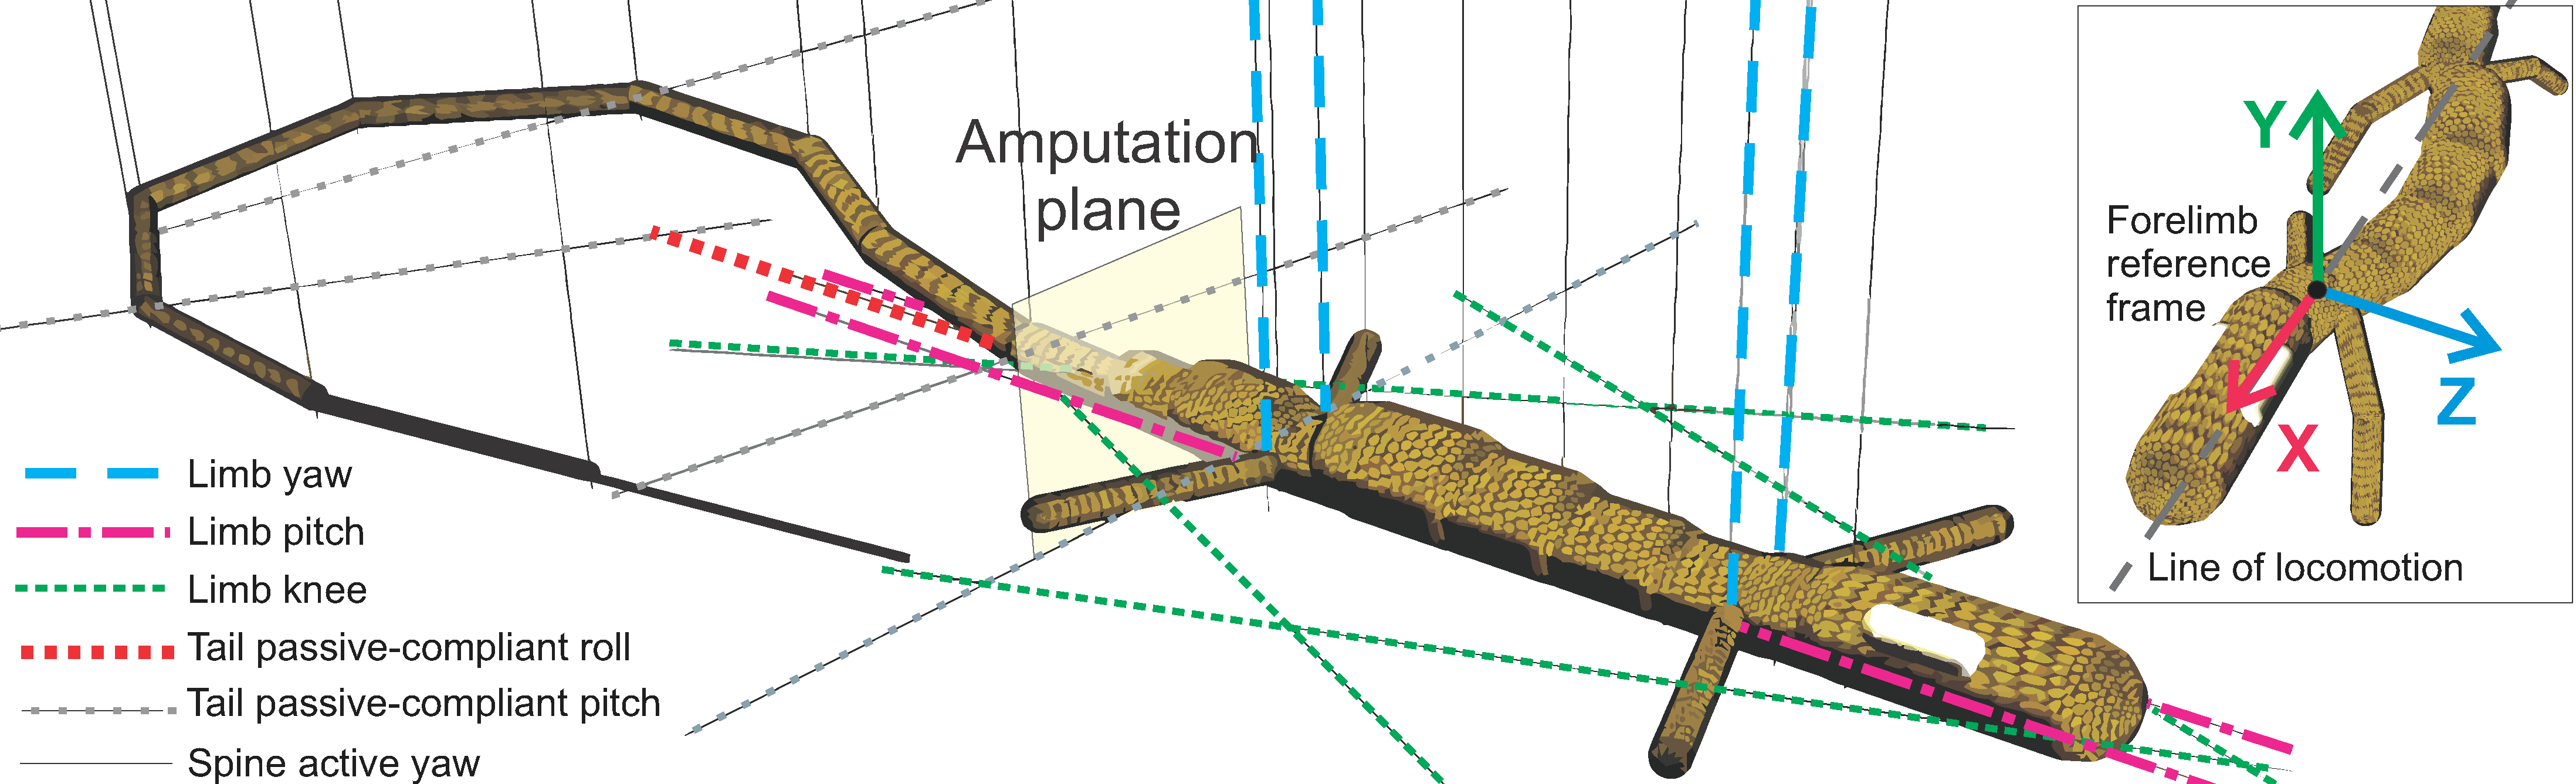 Illustration of the amputation plane of the long-tailed lizard model.